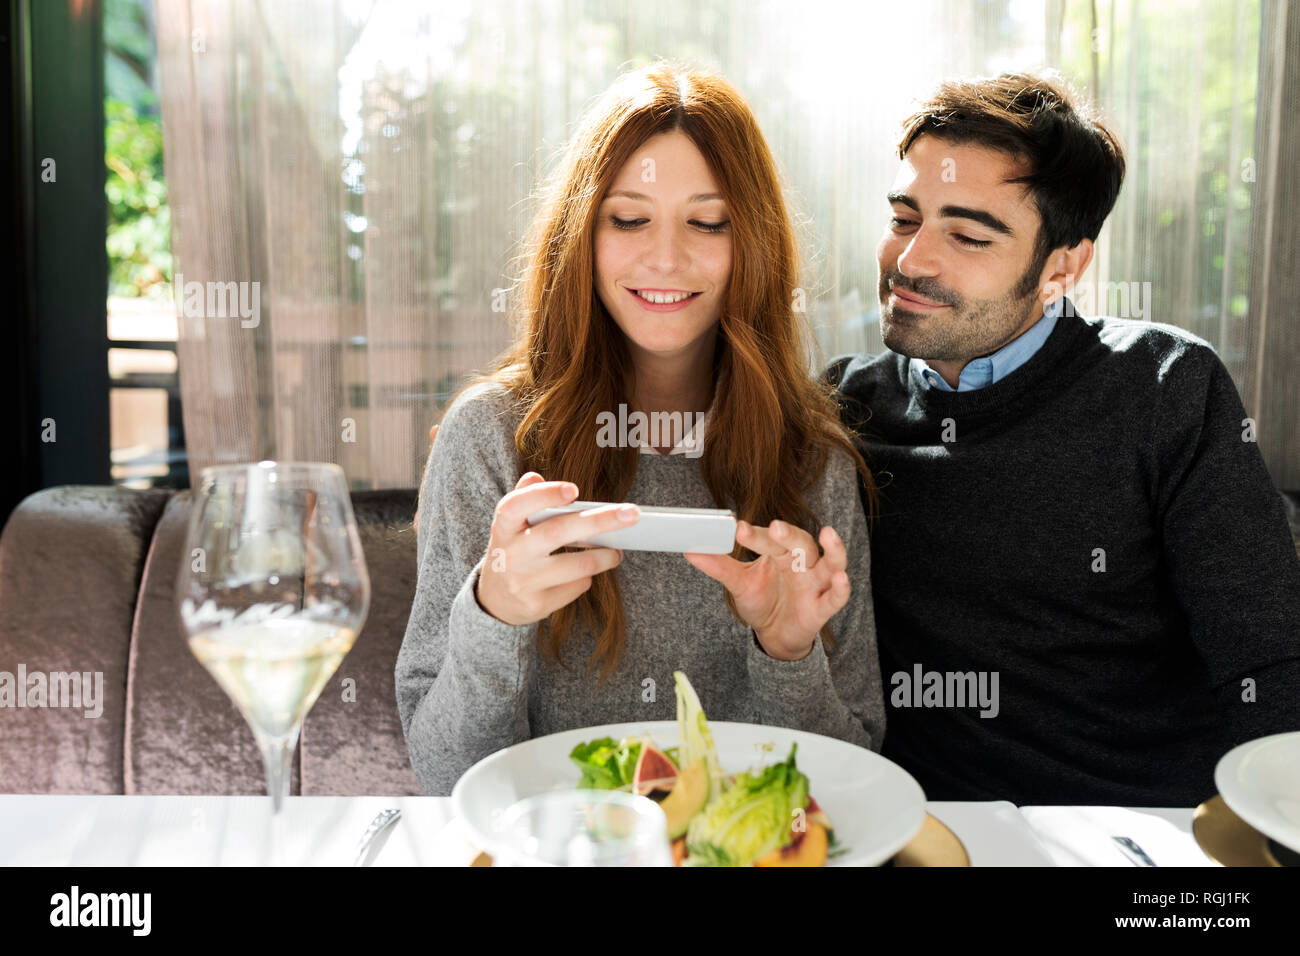 Smiling couple using cell phone in a restaurant Banque D'Images